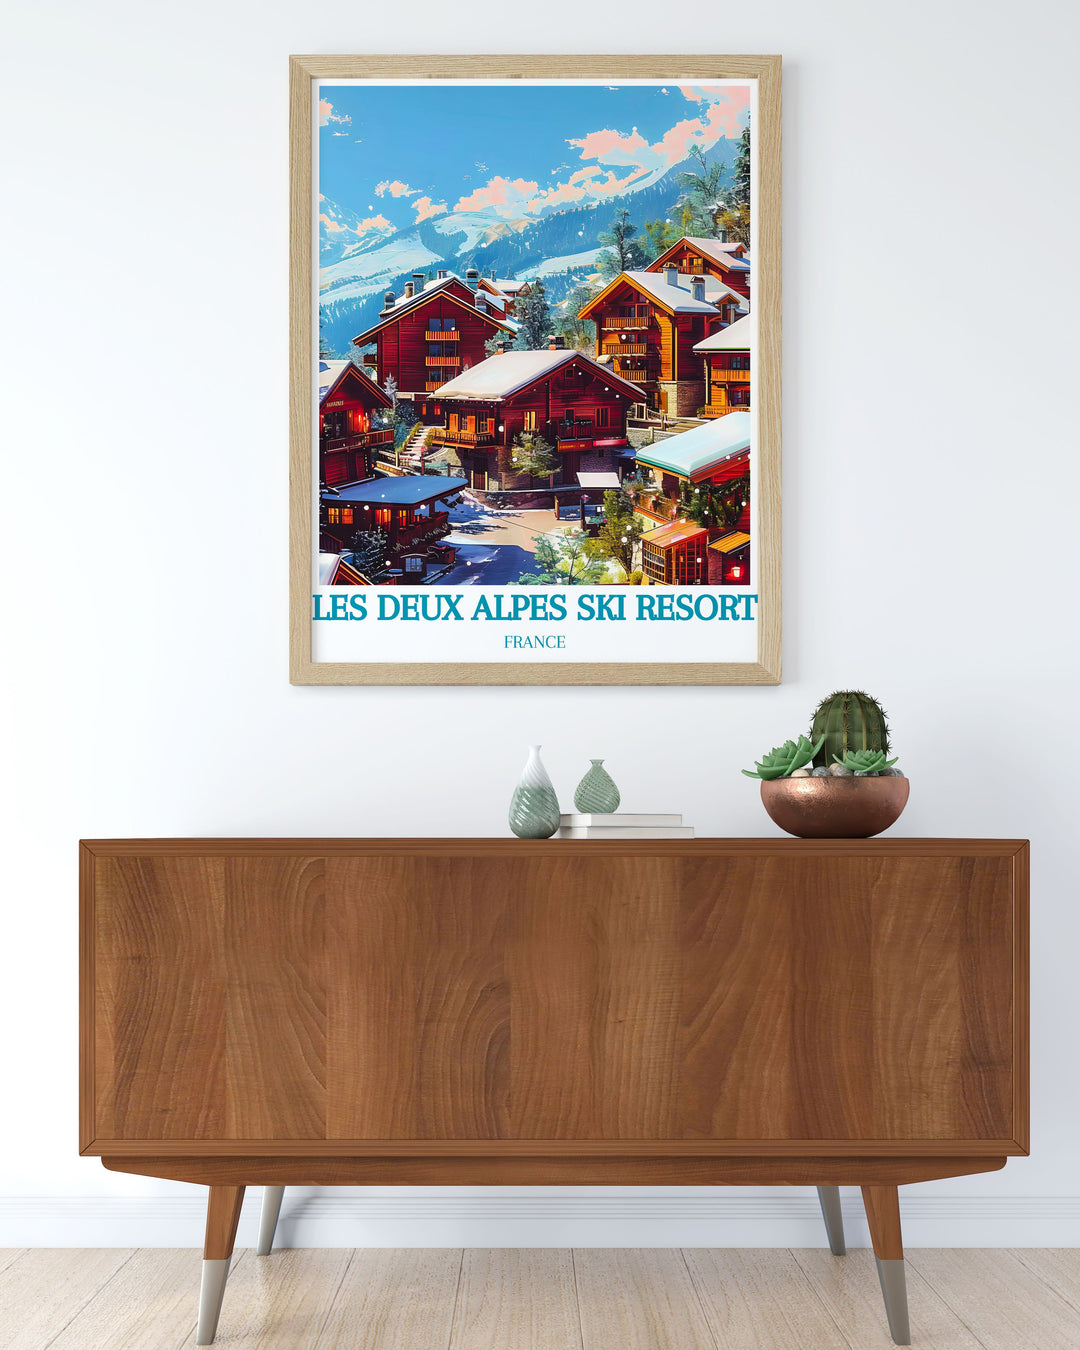 This art print highlights the picturesque winter scenery of Les Deux Alpes, with its snow covered chalets and lively ski runs, making it a perfect addition to your winter sports art collection.